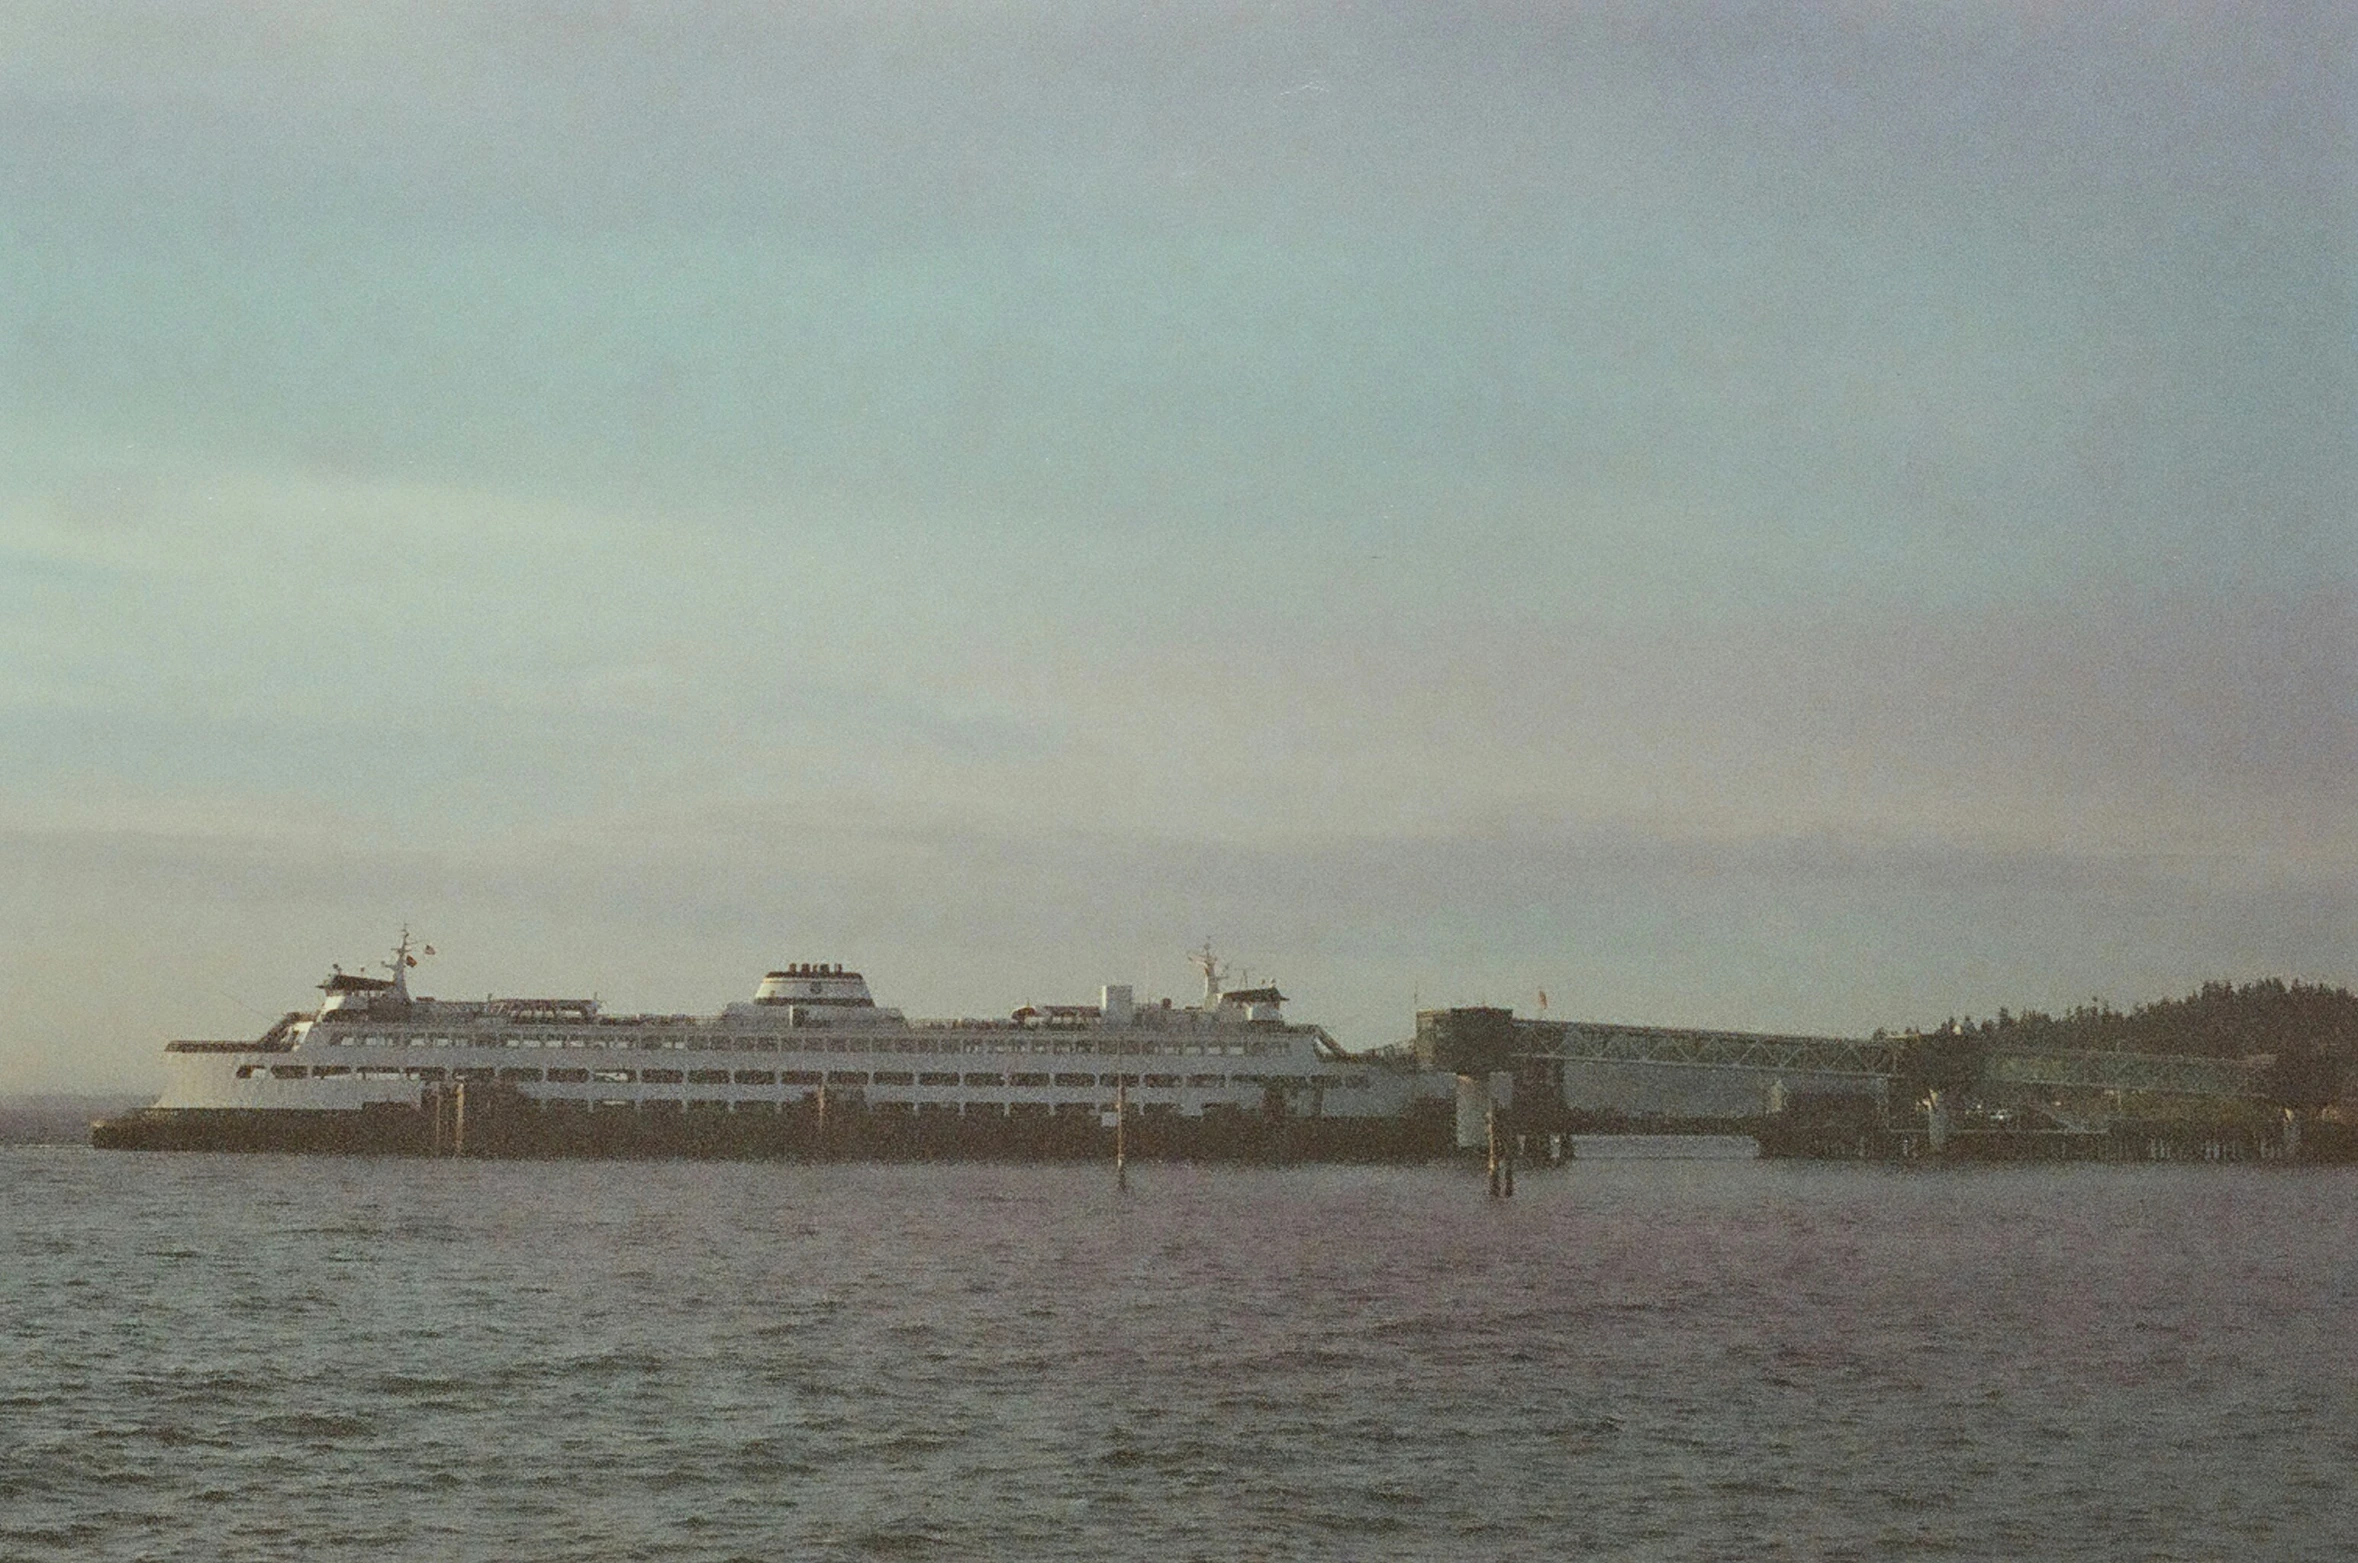 the large ferry is parked on the shoreline